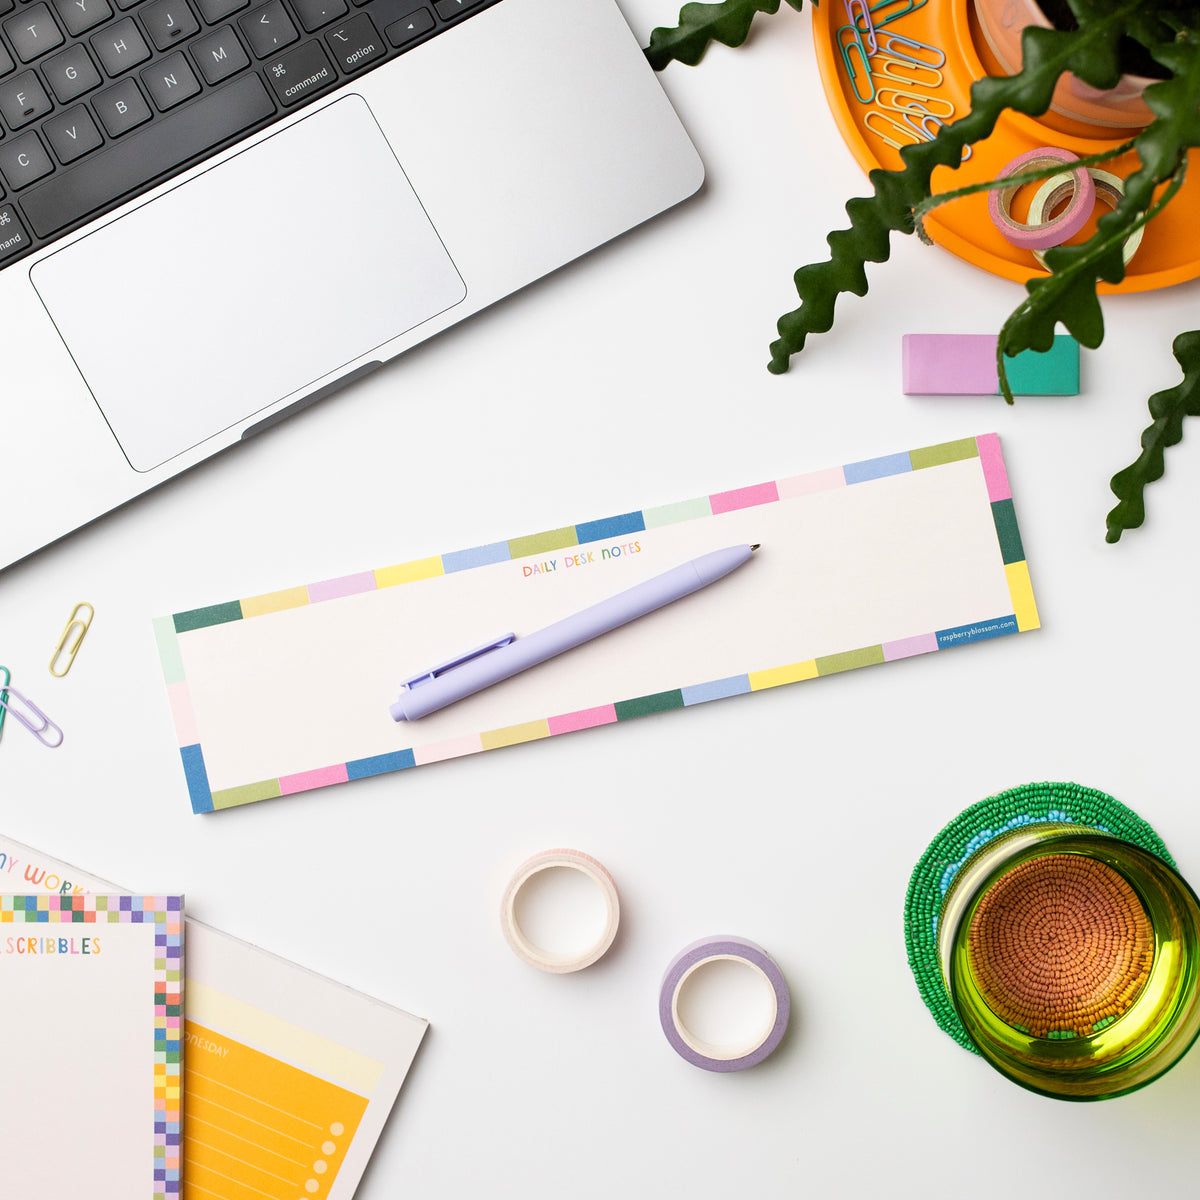 A colourful oblong notepad shown on a desk next to a laptop, other notepads, a glass, a pen, some tape and paperclips plus a pot plant.